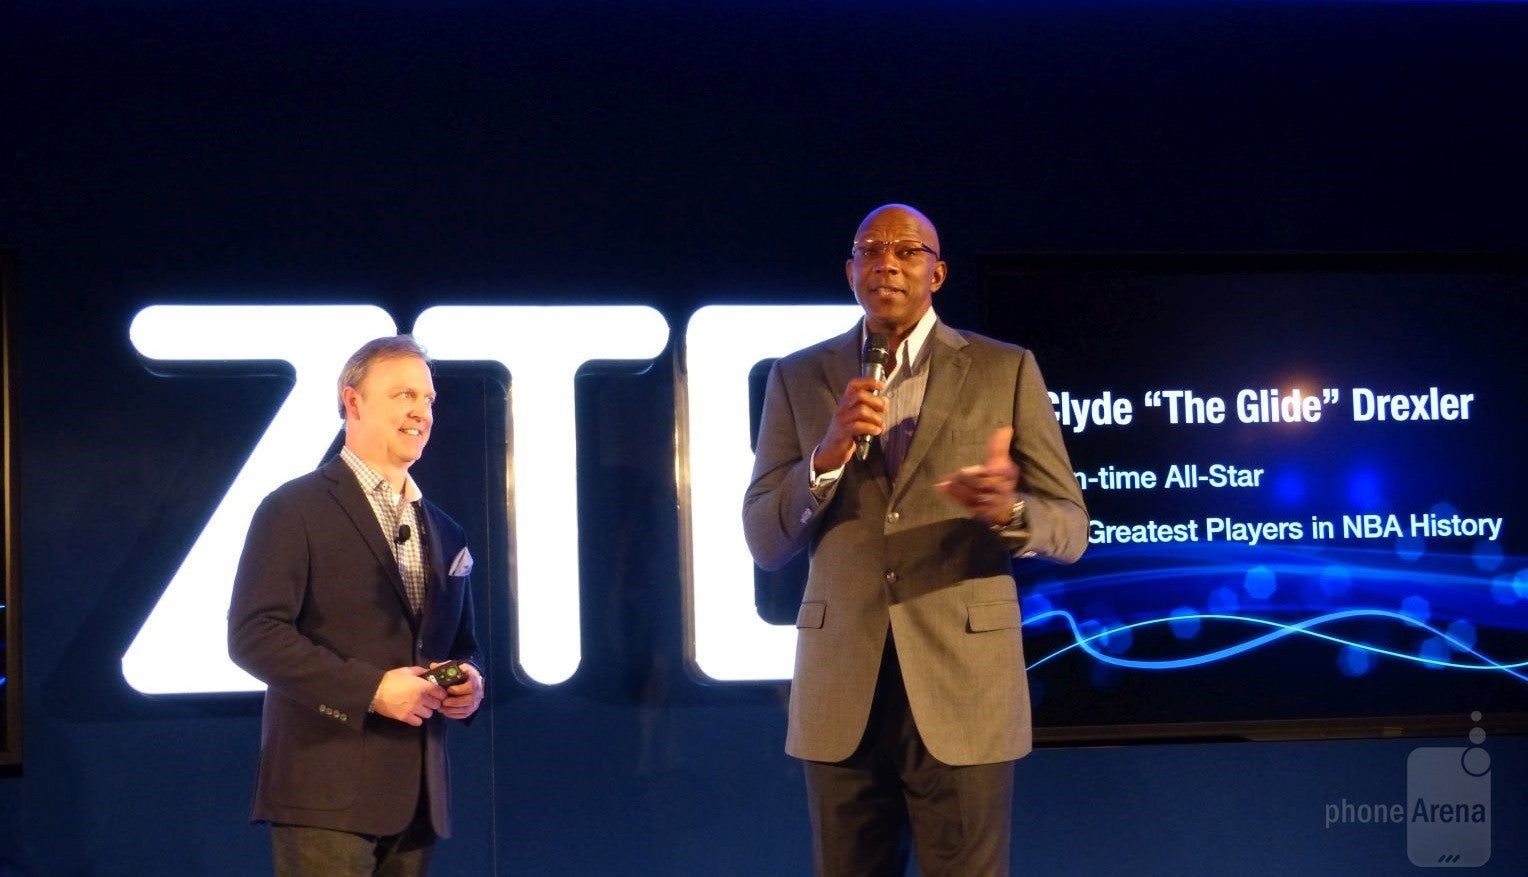 NBA All-Star Clyde Drexler made his pitch, and shared genuine excitement over ZTE, particularly the new SPRO2 smart projector - From CES 2015 – Brands to watch in the US: ZTE (part 2 of 2)